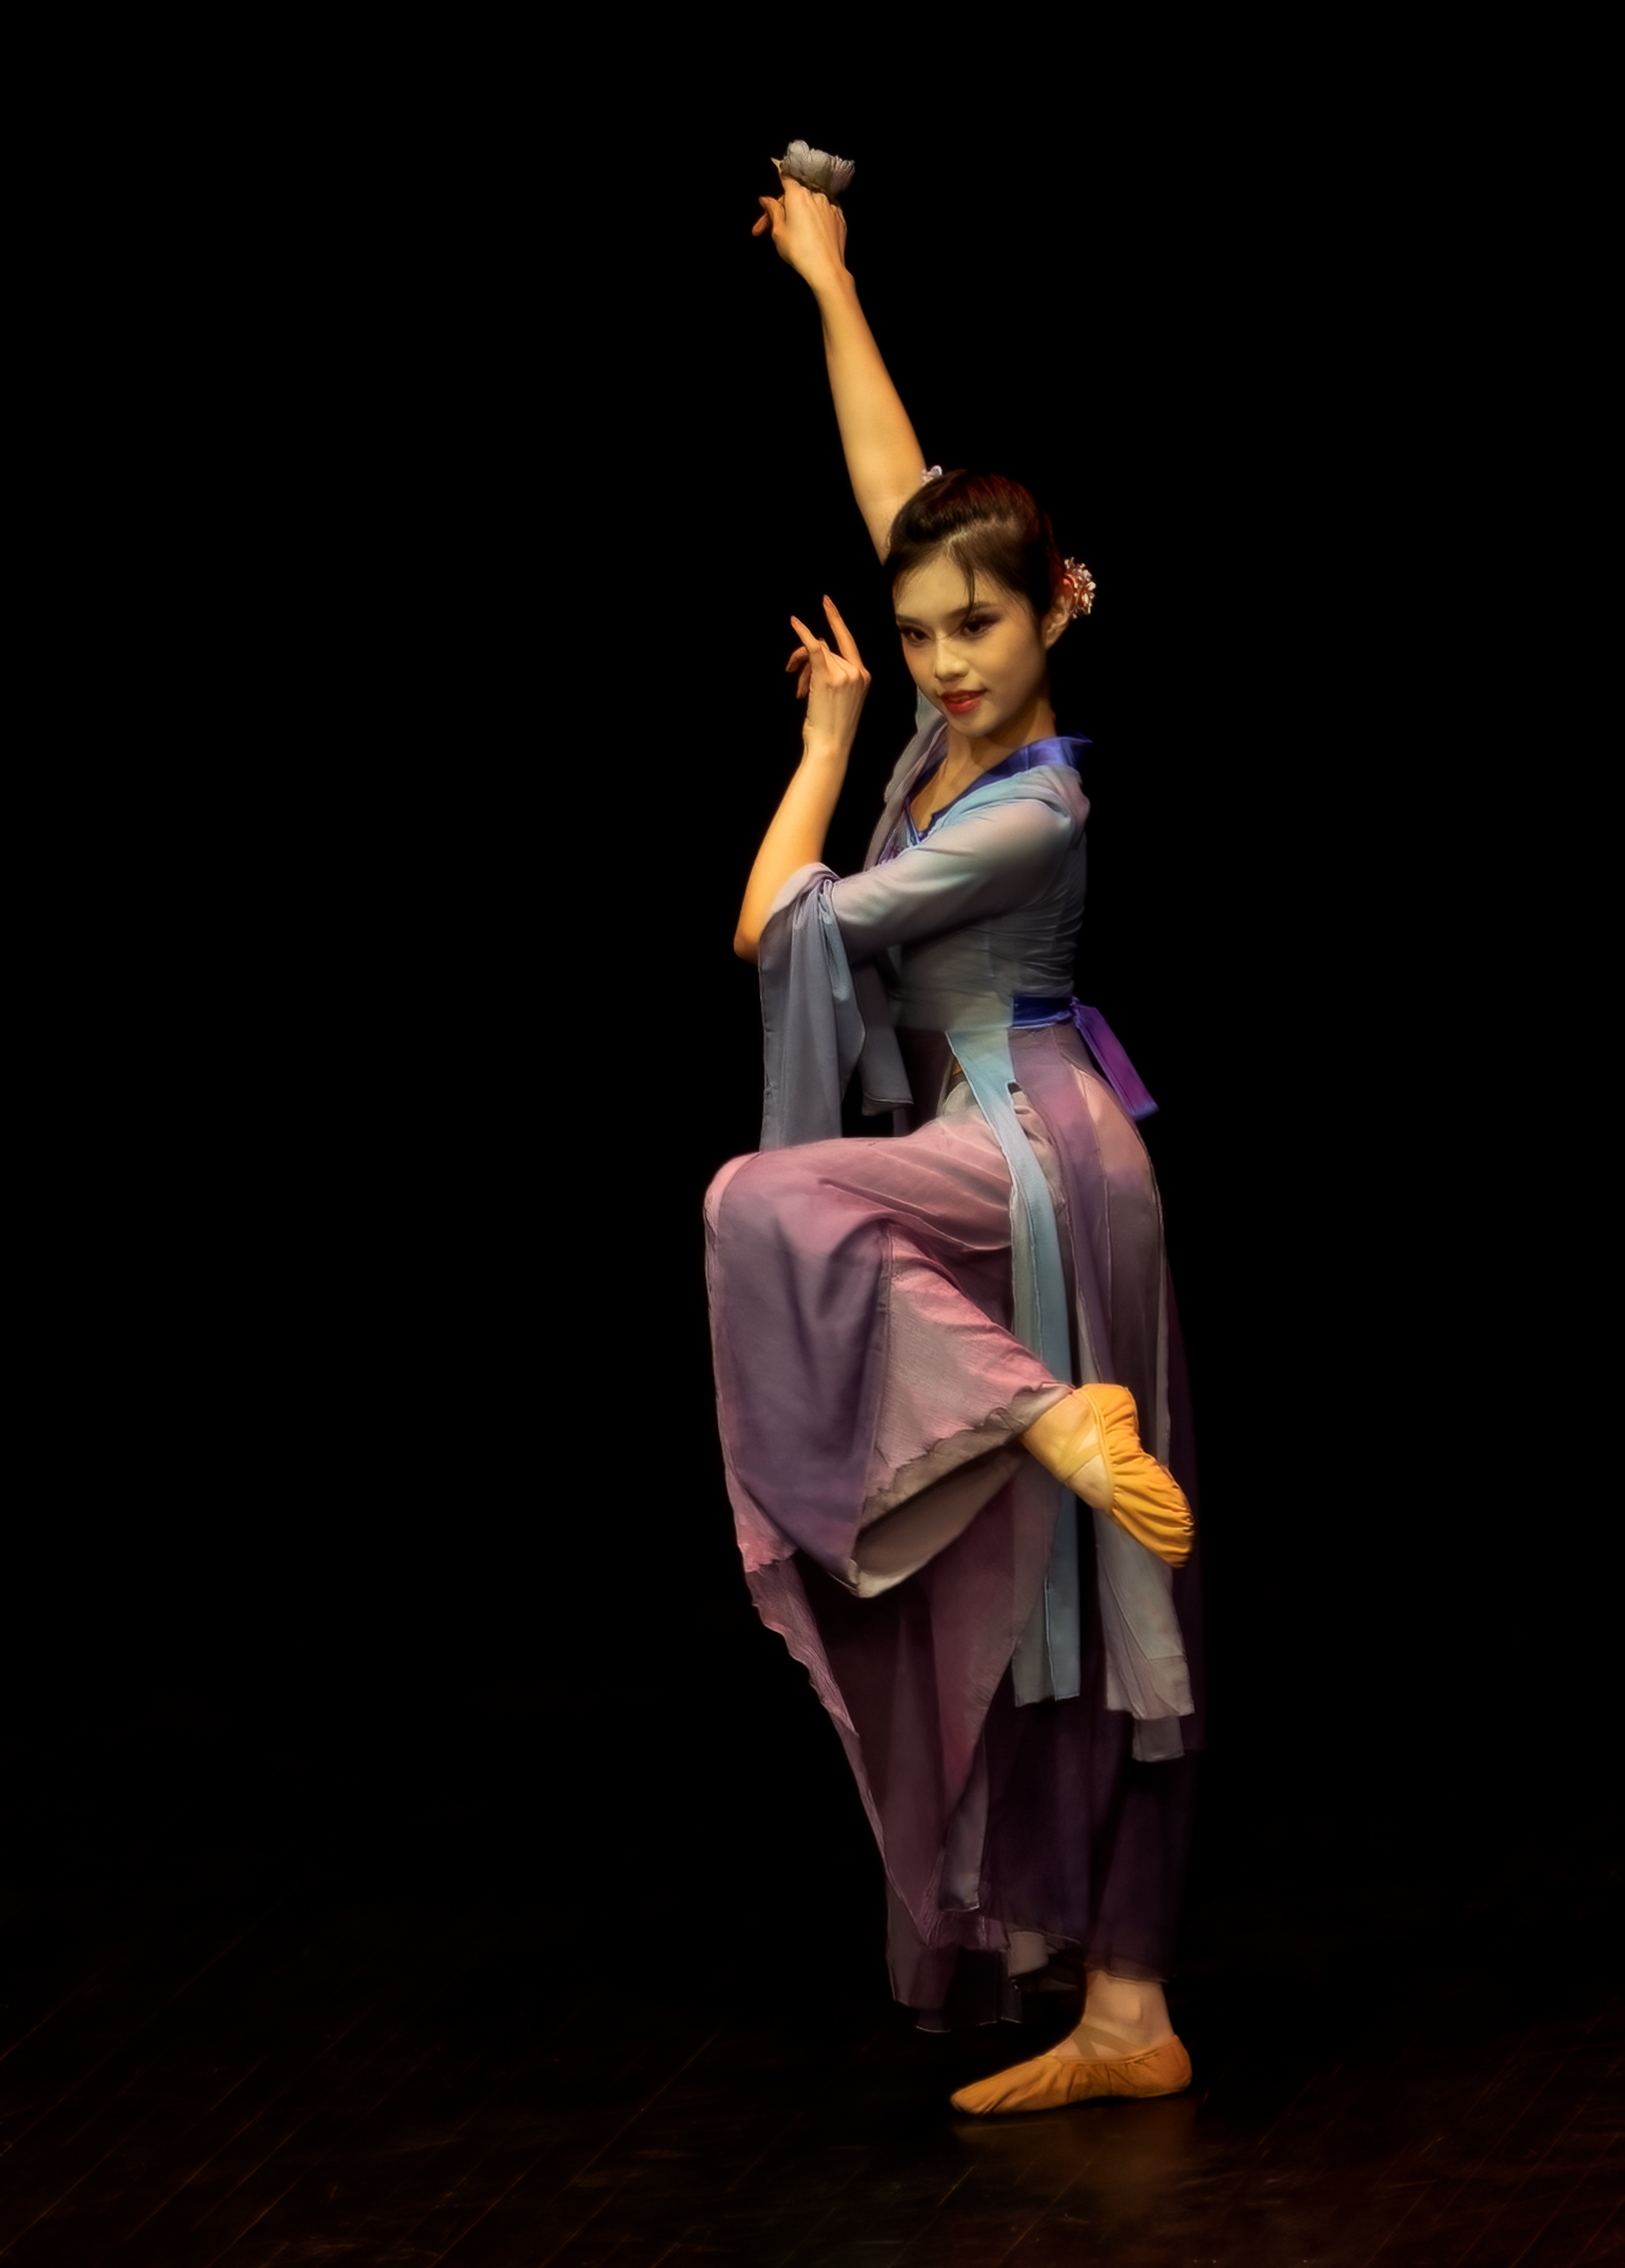 3rd Place, The dancer, Lily Kwok